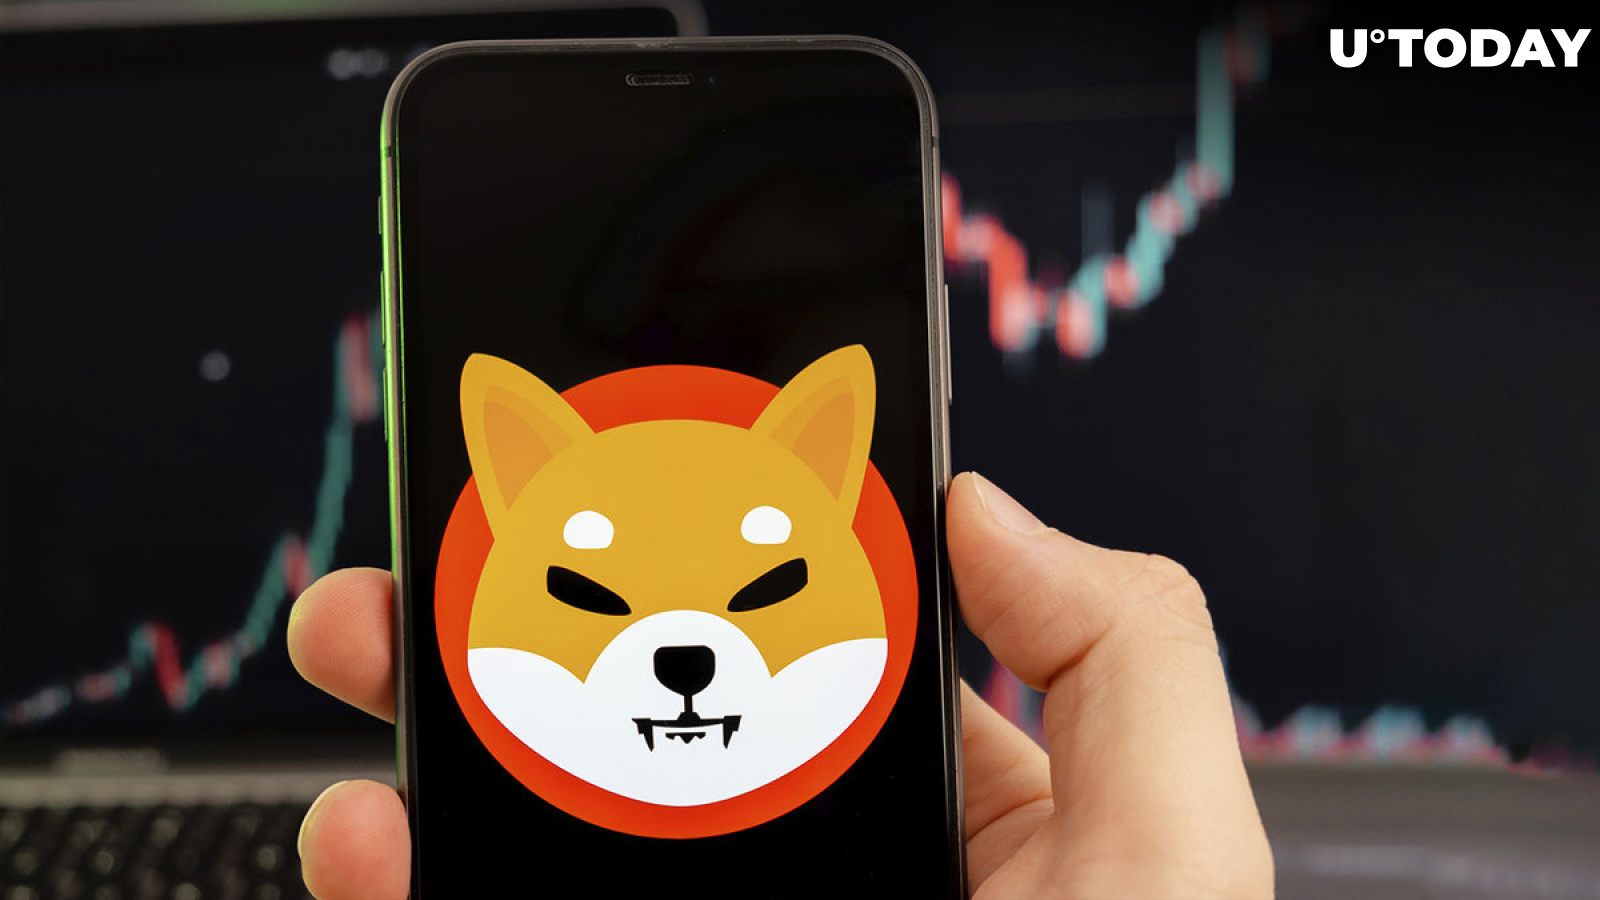 Shiba Inu (SHIB) to Face $1.3 Billion in Selling Pressure If Price Rises to This Level